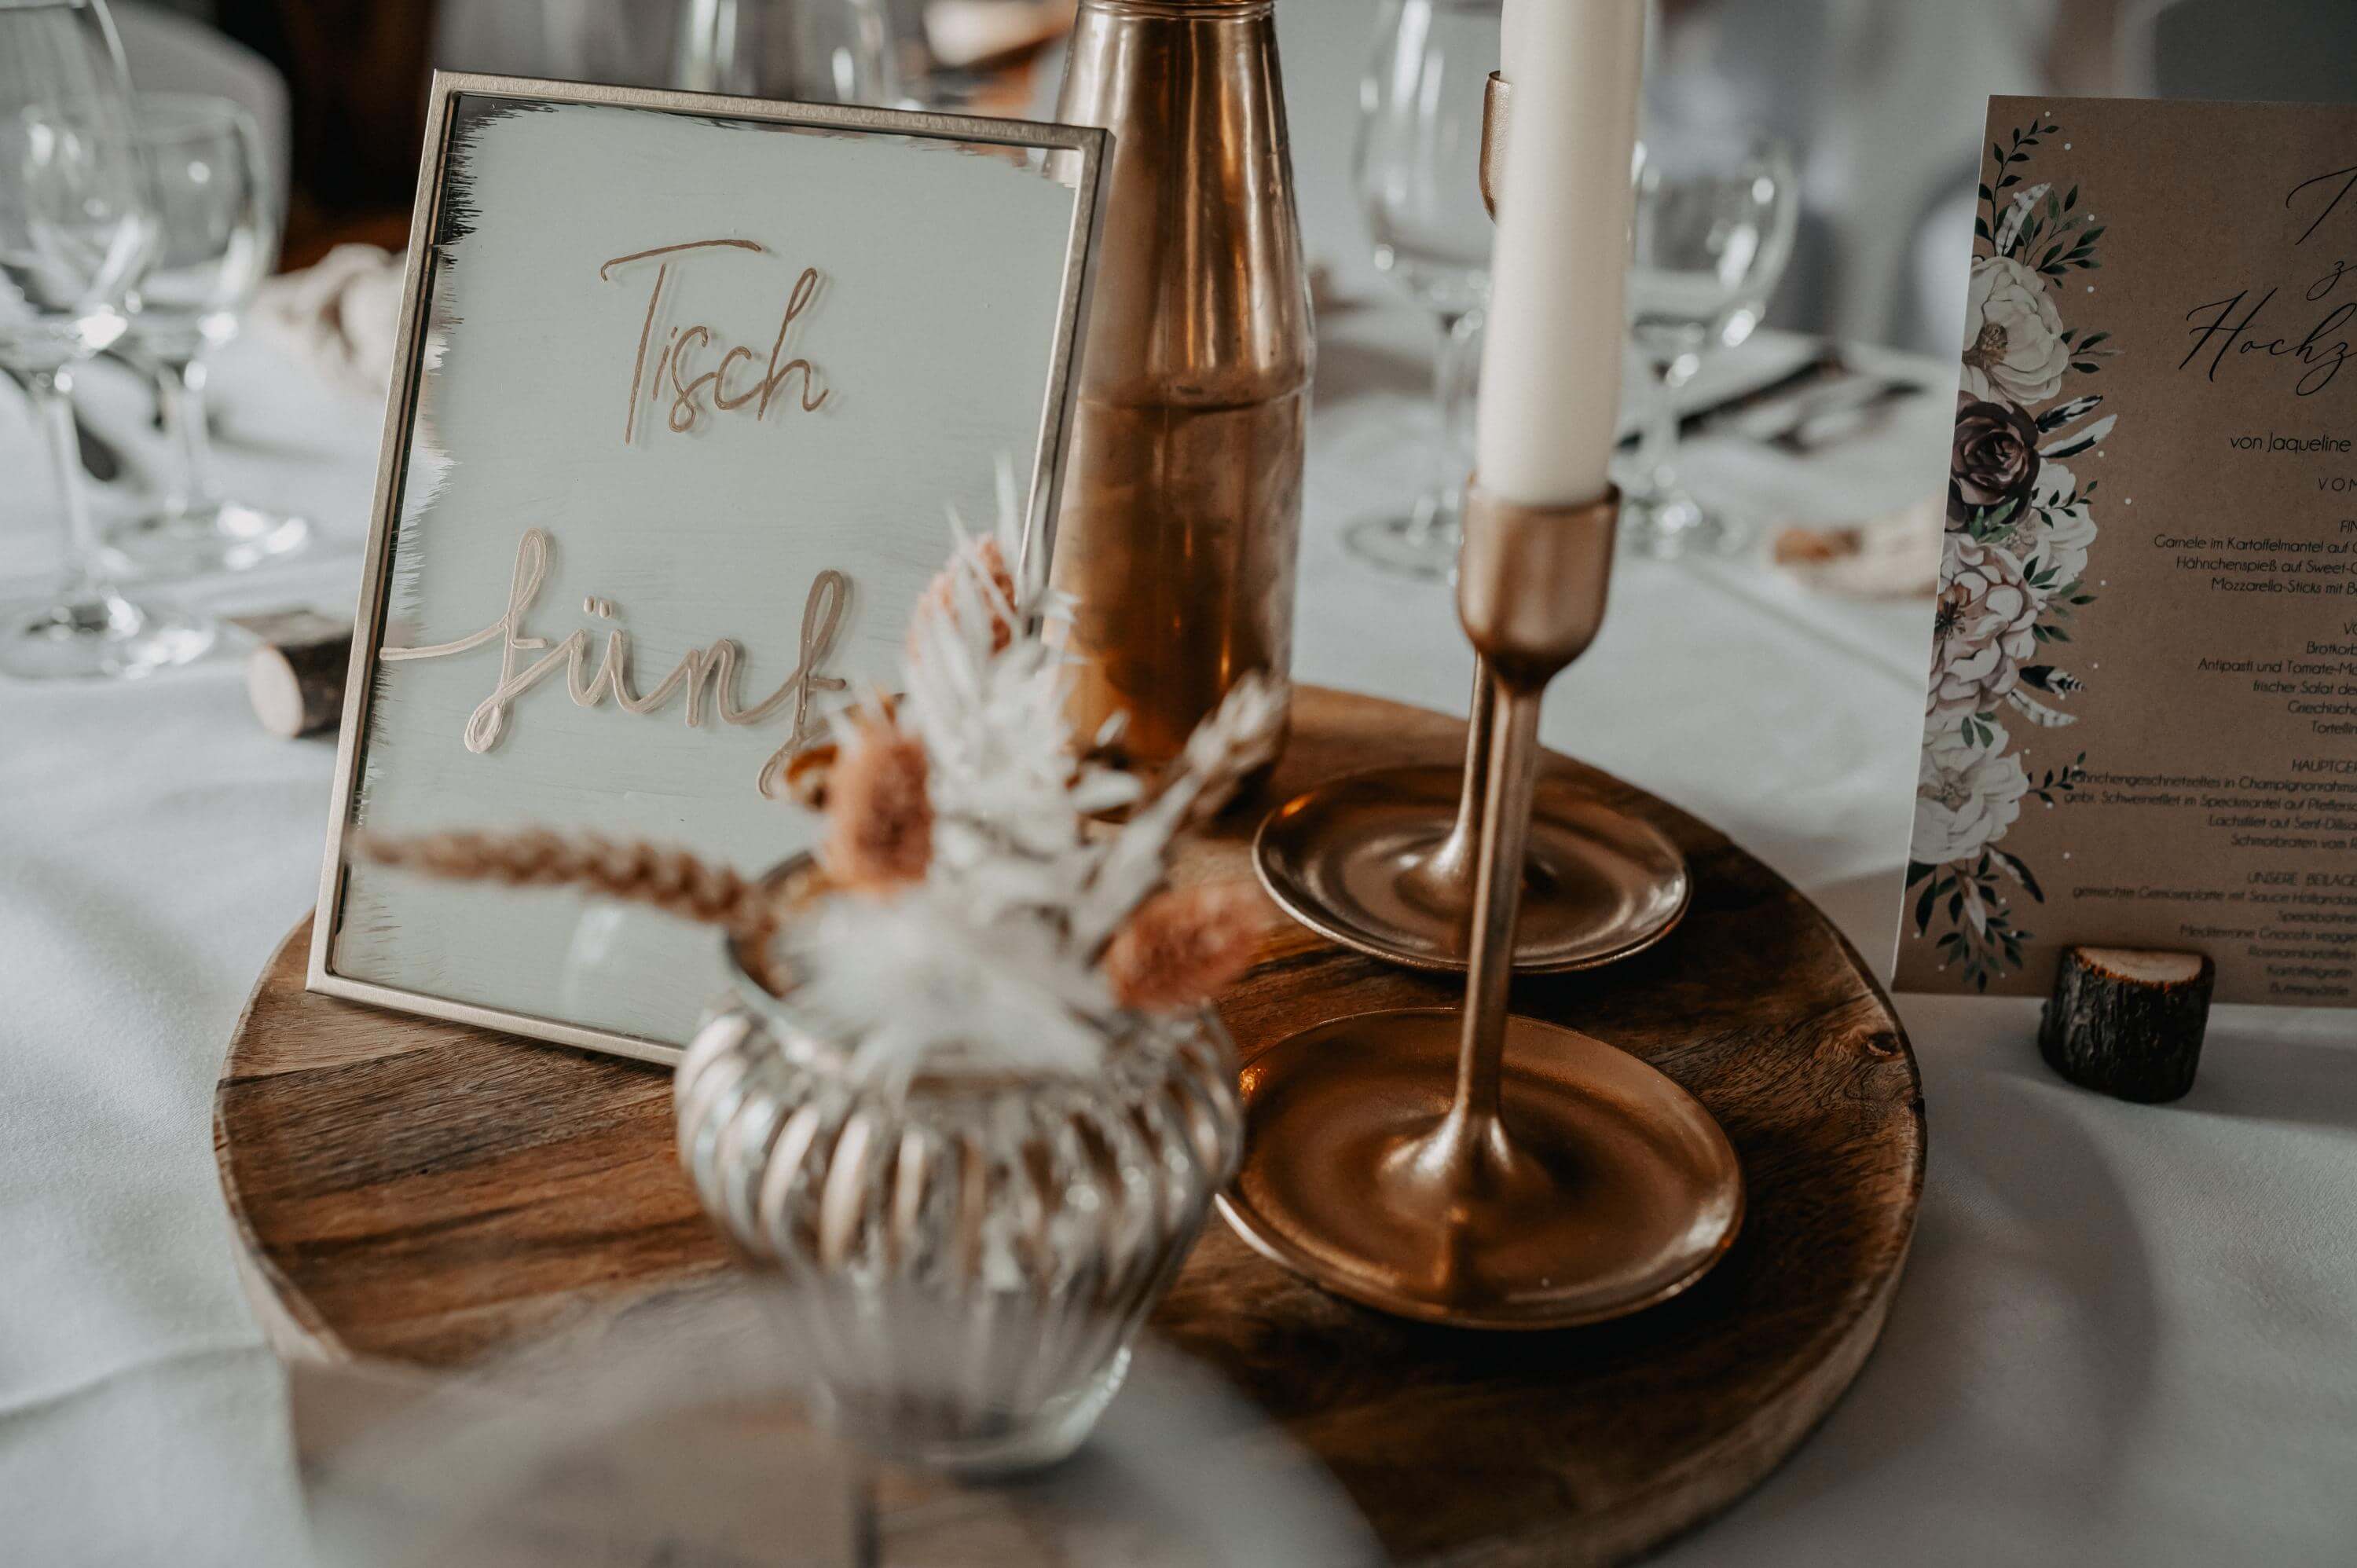 The copper and white colored table decoration with table number in vintage style looks classy and modern combined with the iron candlesticks and dried flowers on a wooden plate.